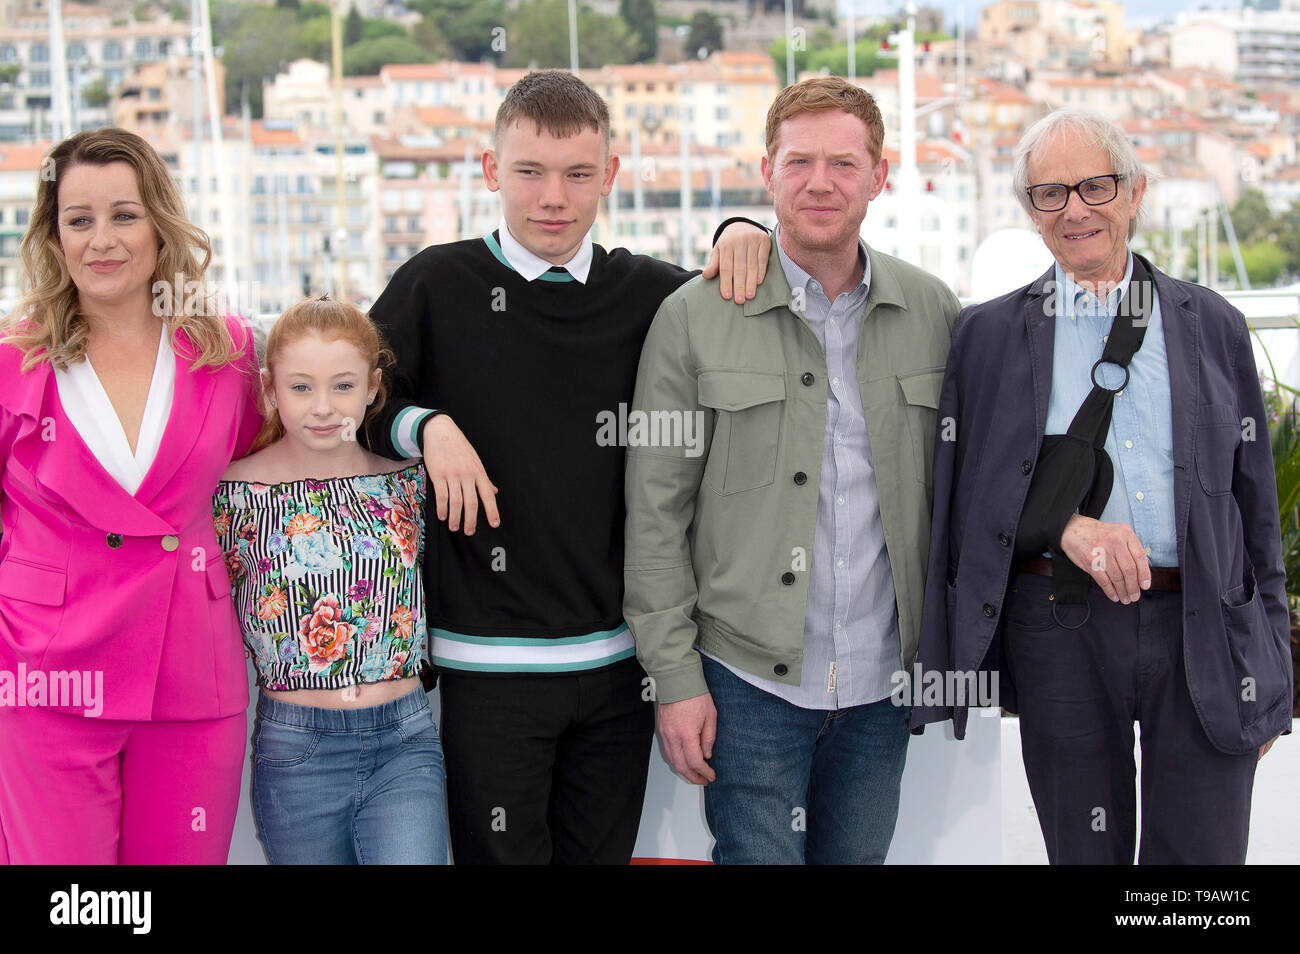 Debbie Honeywood, Katie Proctor, Rhys Stone, Kris Hitchen and Ken Loach at the 'Sorry We Missed You' photocall during the 72nd Cannes Film Festival at the Palais des Festivals on May 17, 2019 in Cannes, France Stock Photo